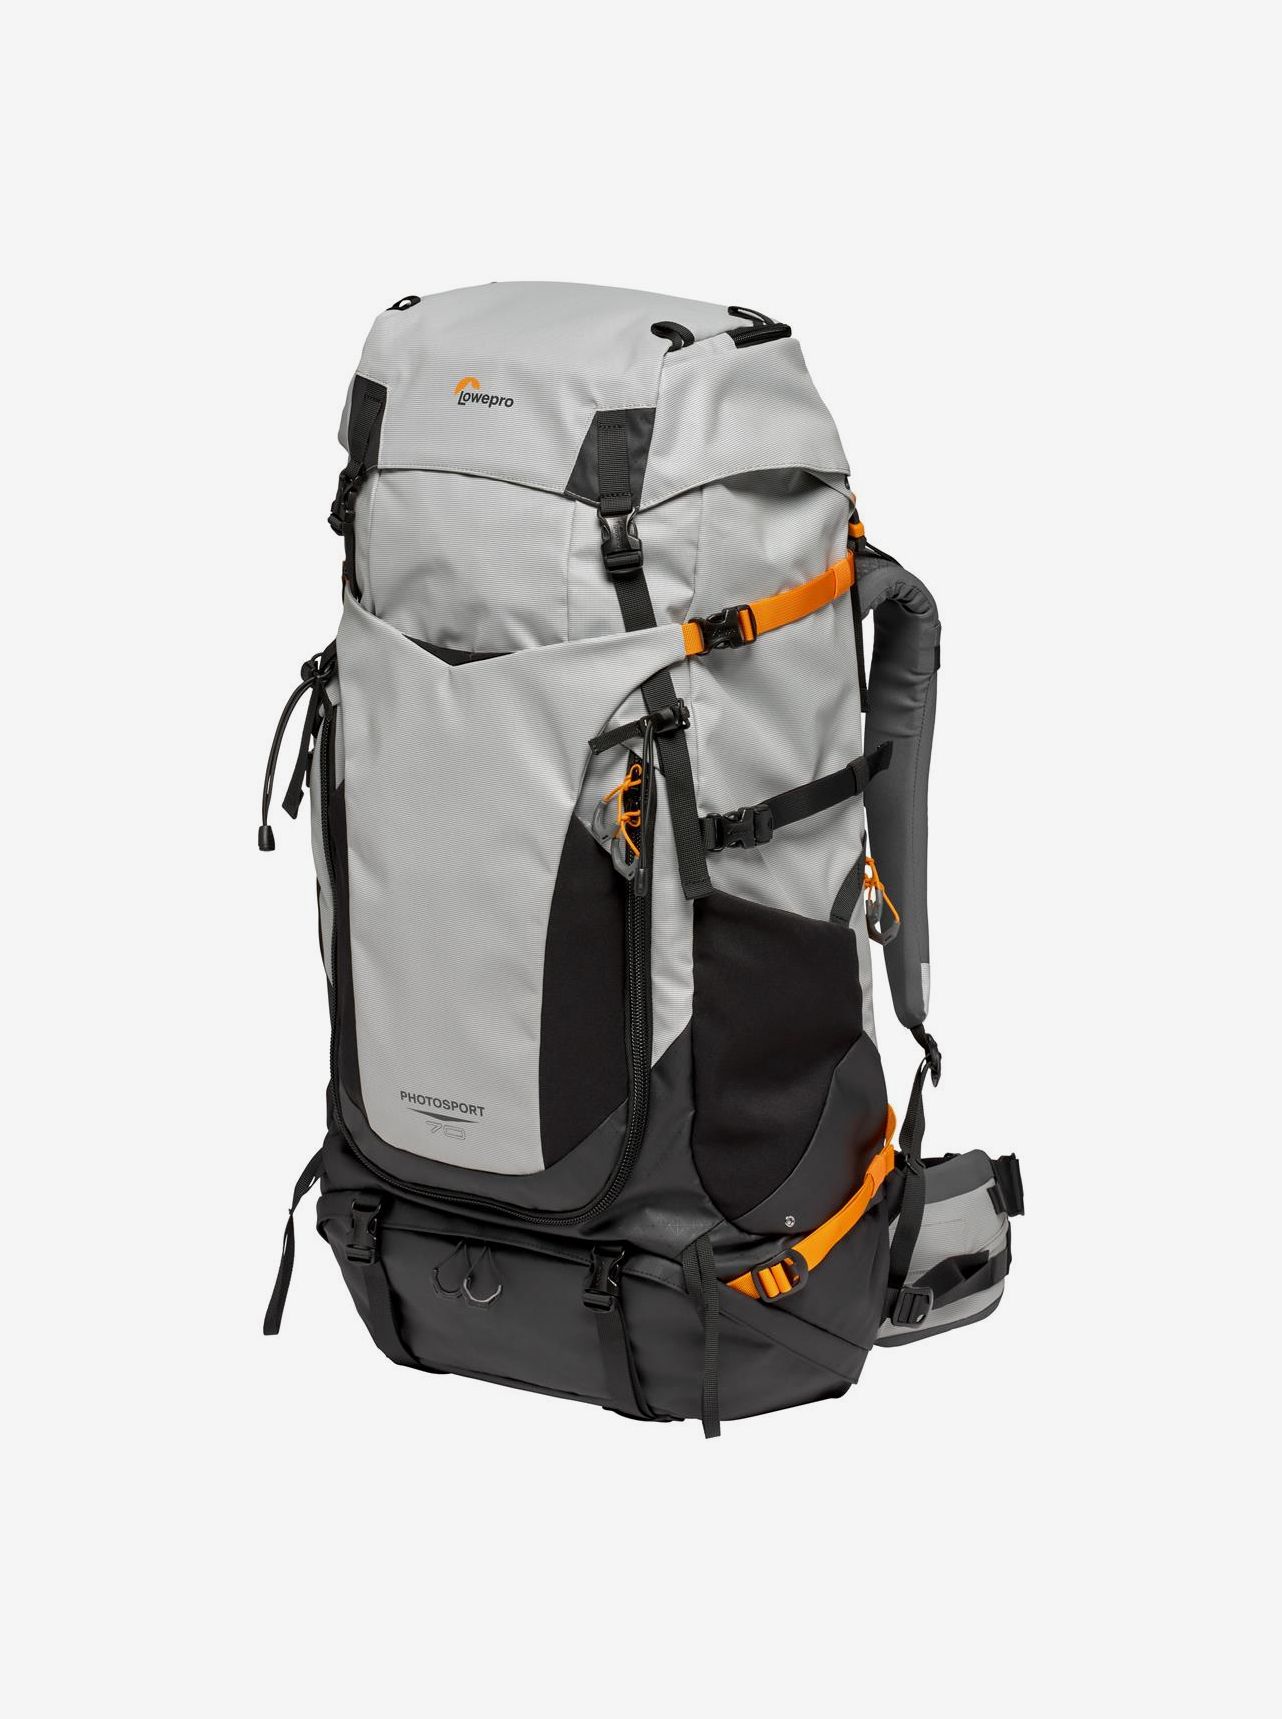 5 best travel backpacks, according to experts